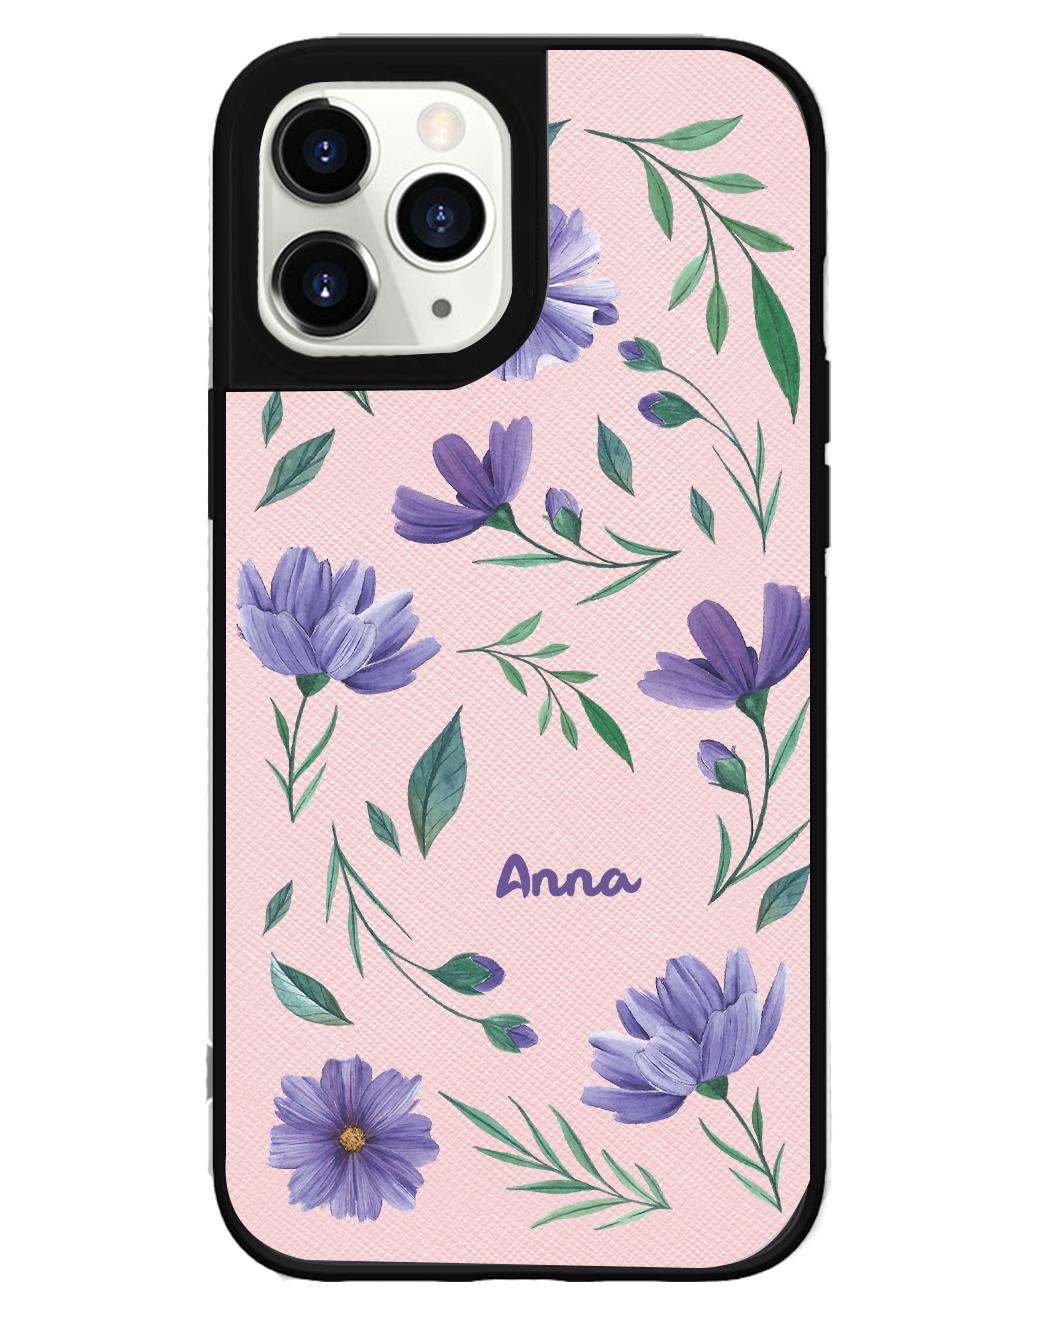 iPhone Leather Grip Case - February Violet